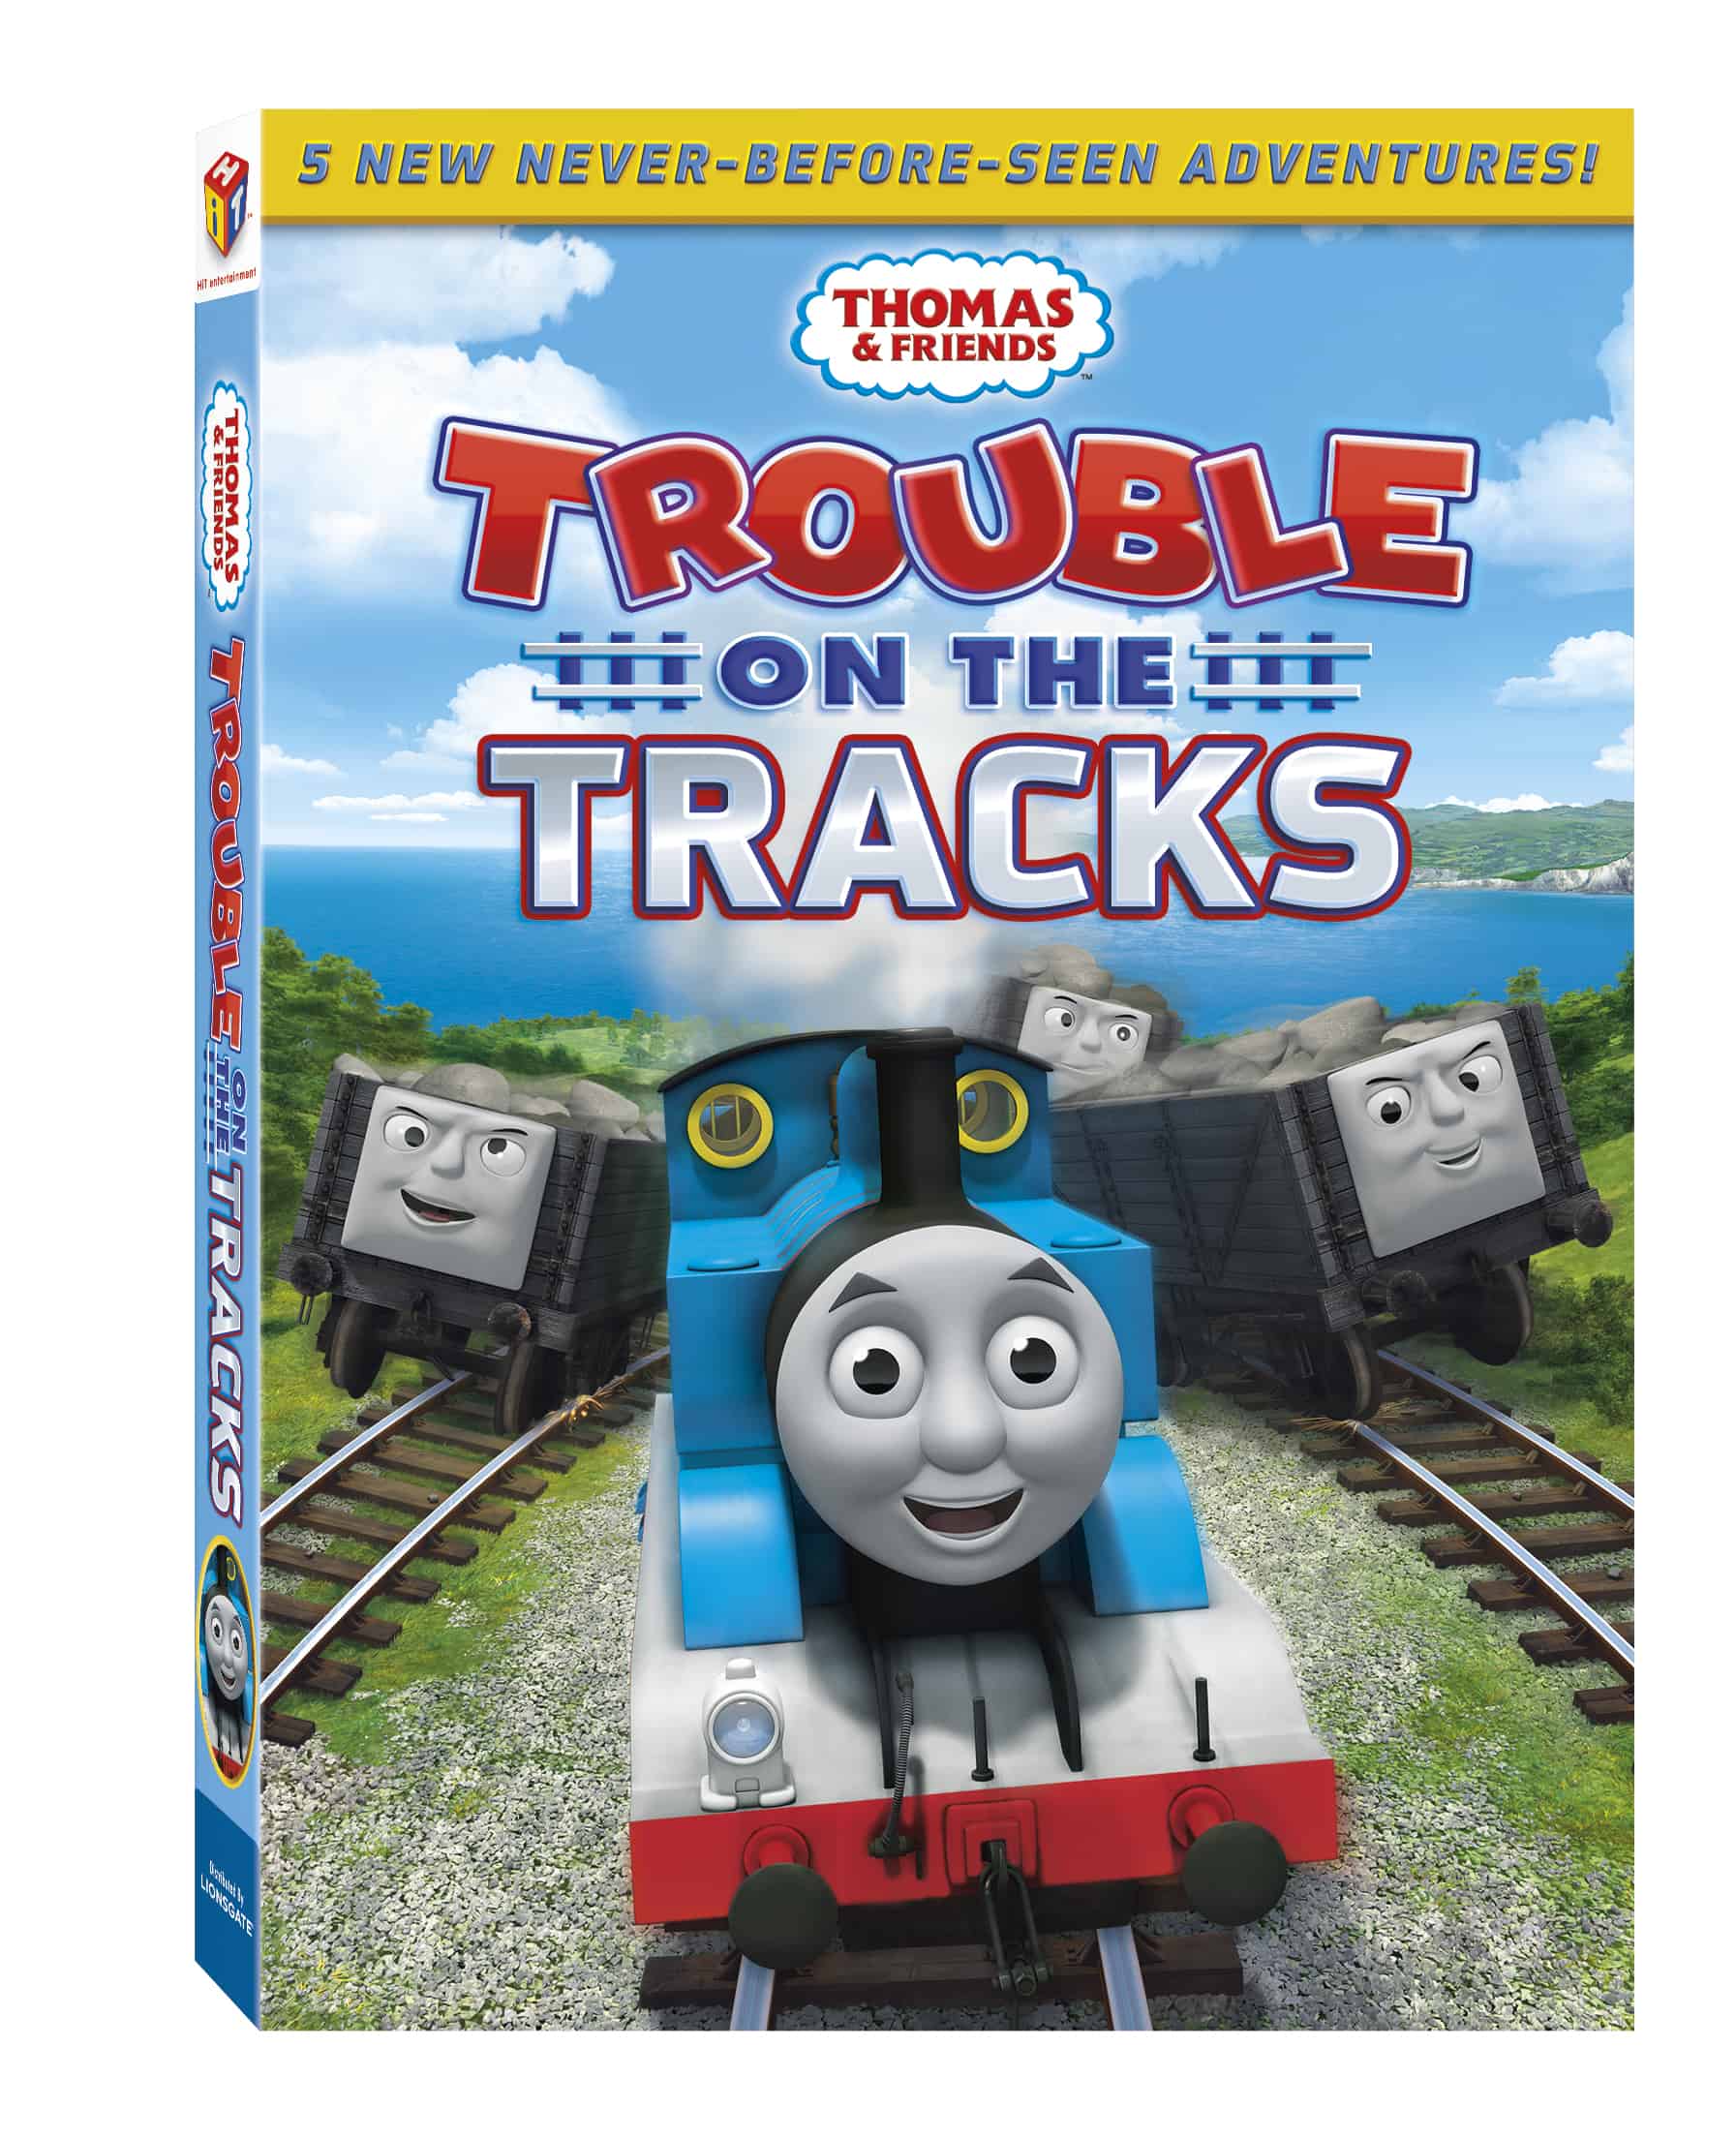 Thomas and friends trouble on the tracks game download